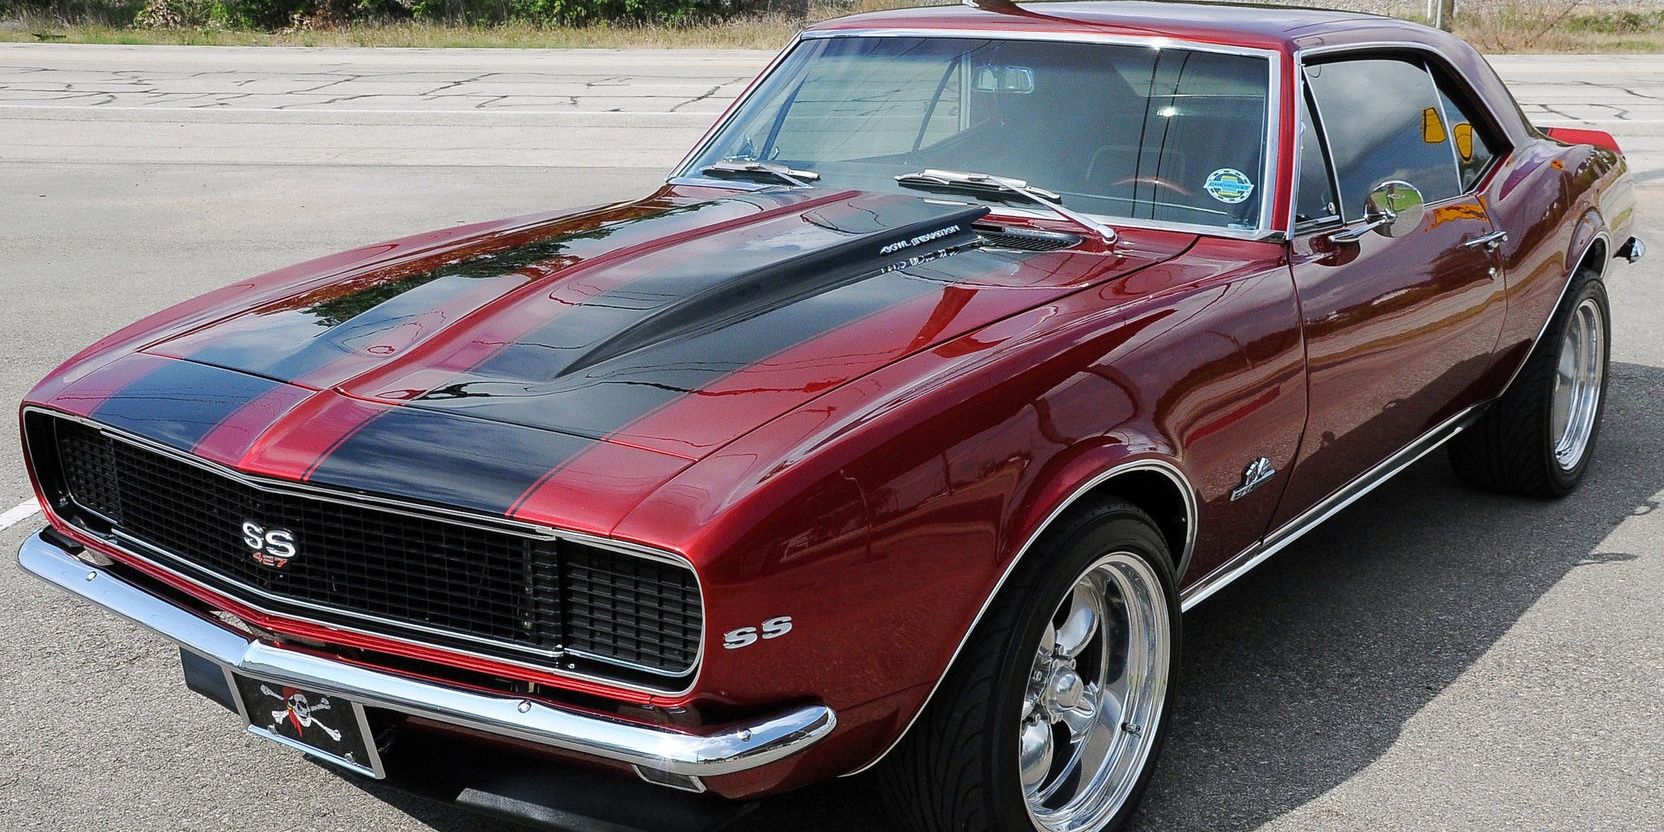 A red and black 1967 Chevrolet Camaro SS parked